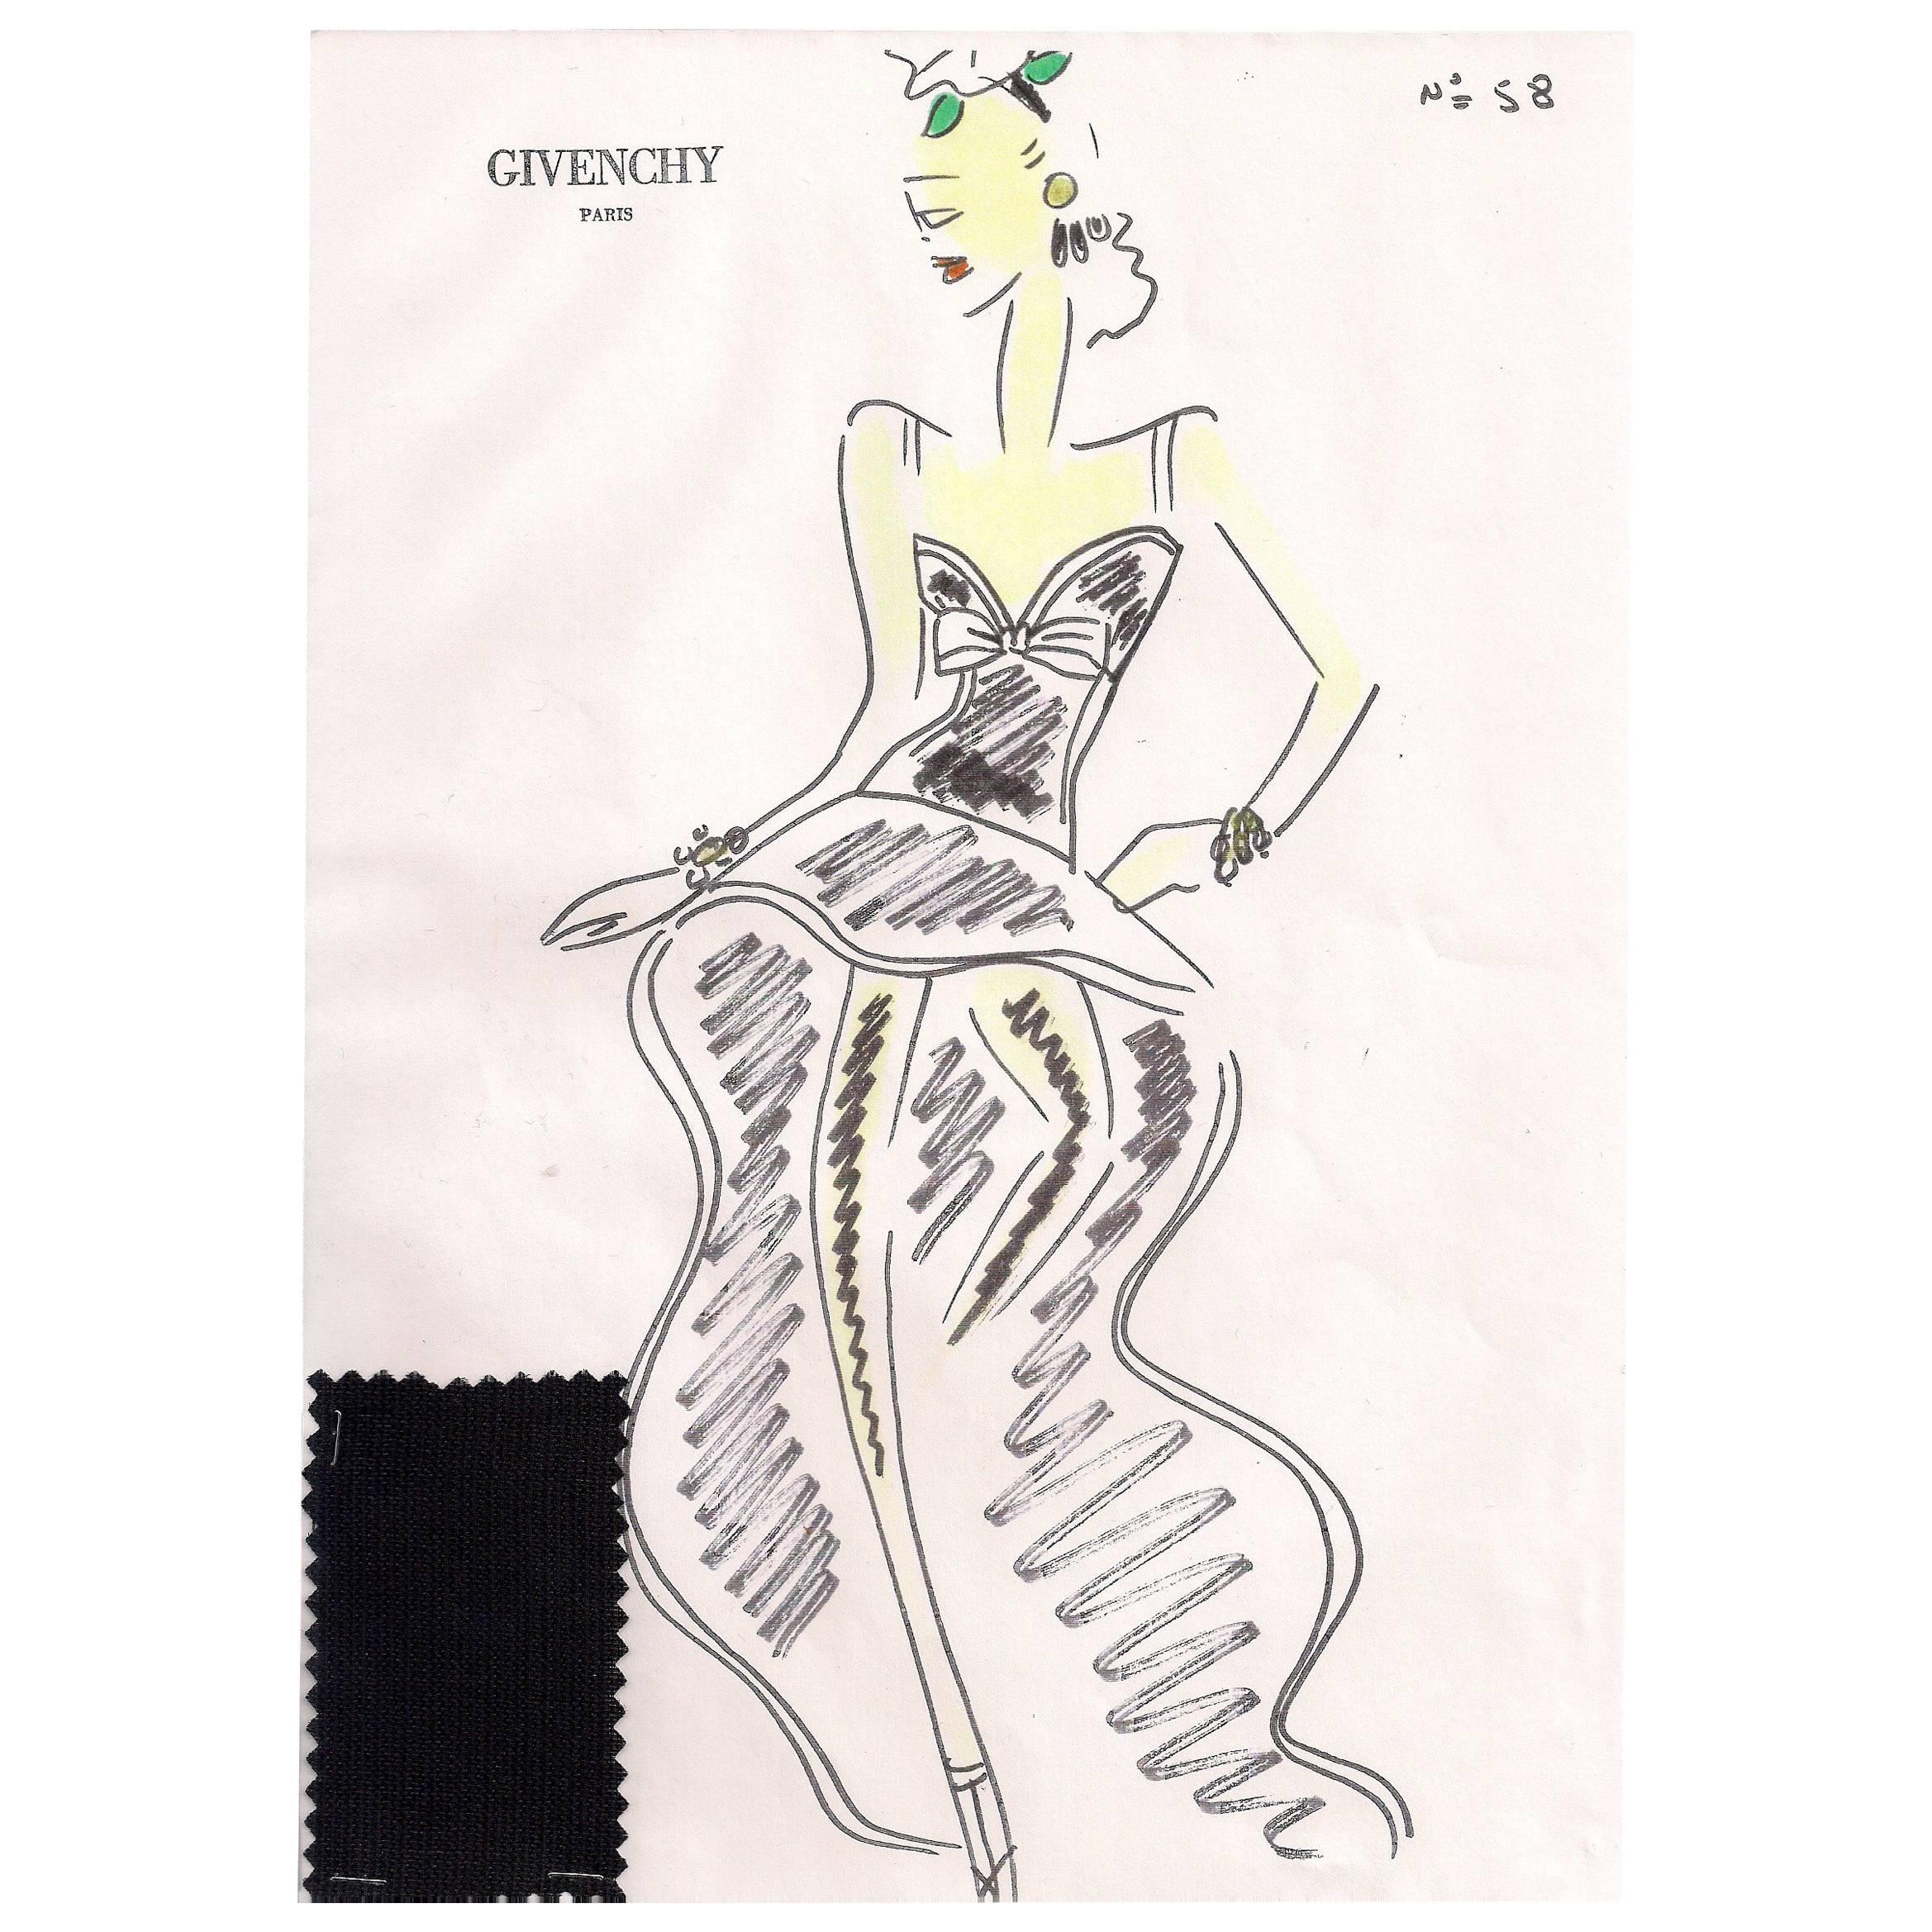 Givenchy Croquis of a High Low Hem Dress with Attached Fabric Swatch